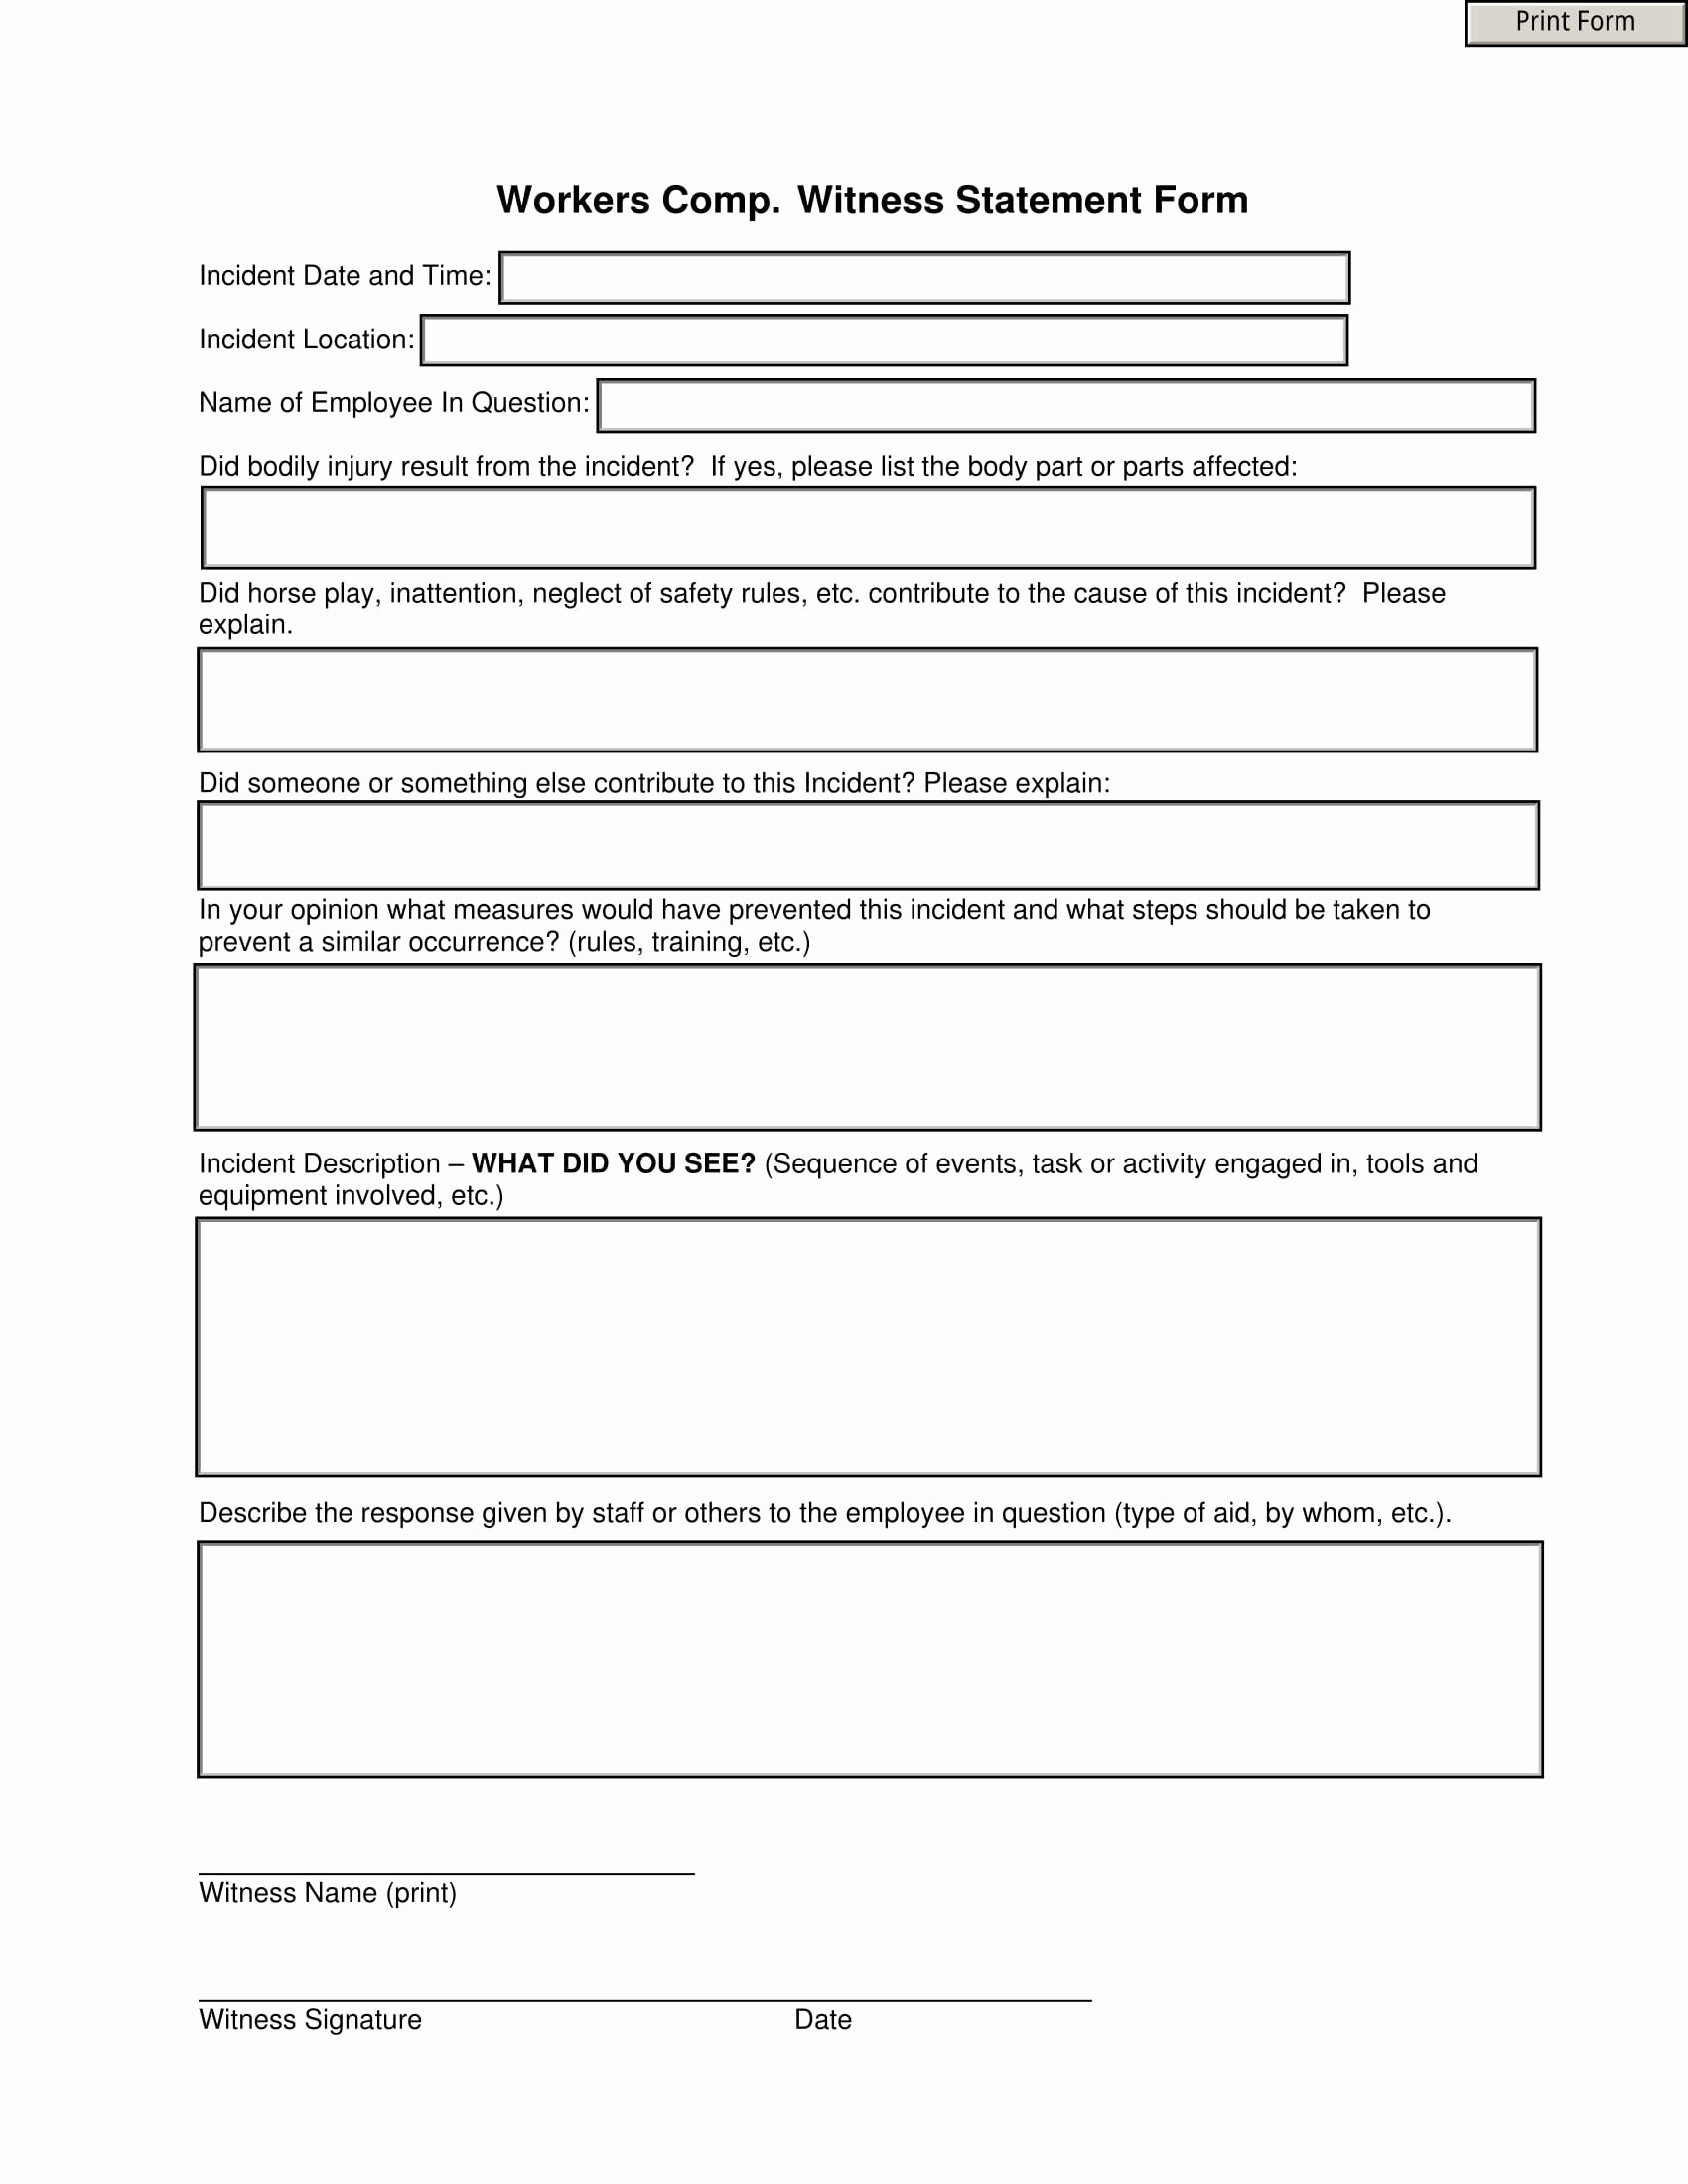 Employee Conflict Resolution Template Elegant 14 Employee Witness Statement forms Free Word Pdf format